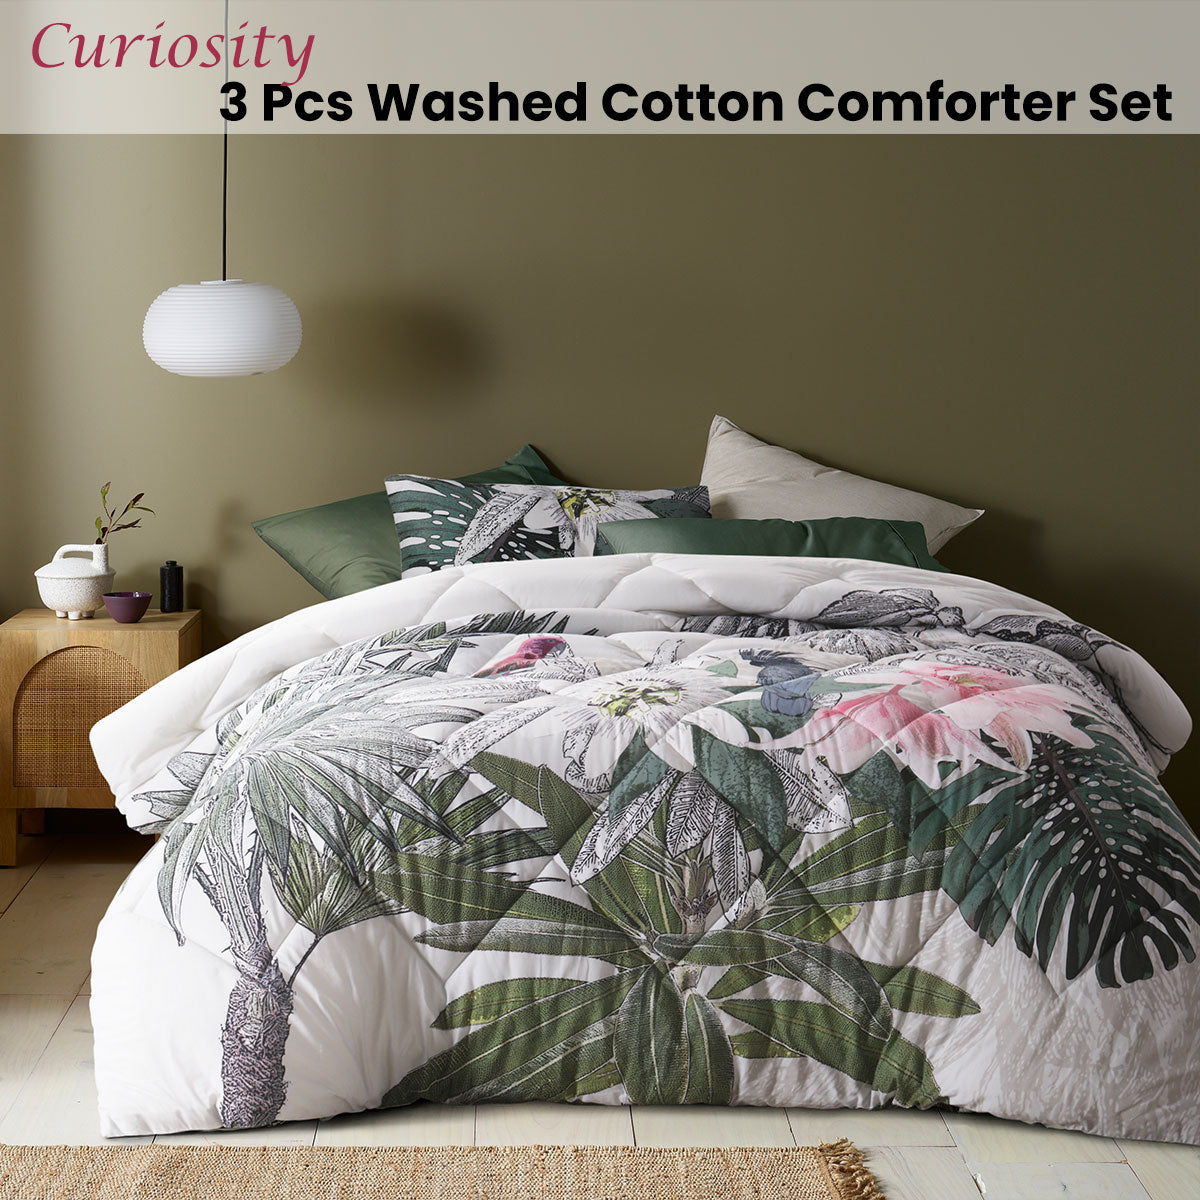 Accessorize Curiosity Washed Cotton Printed 3 Piece Comforter Set King